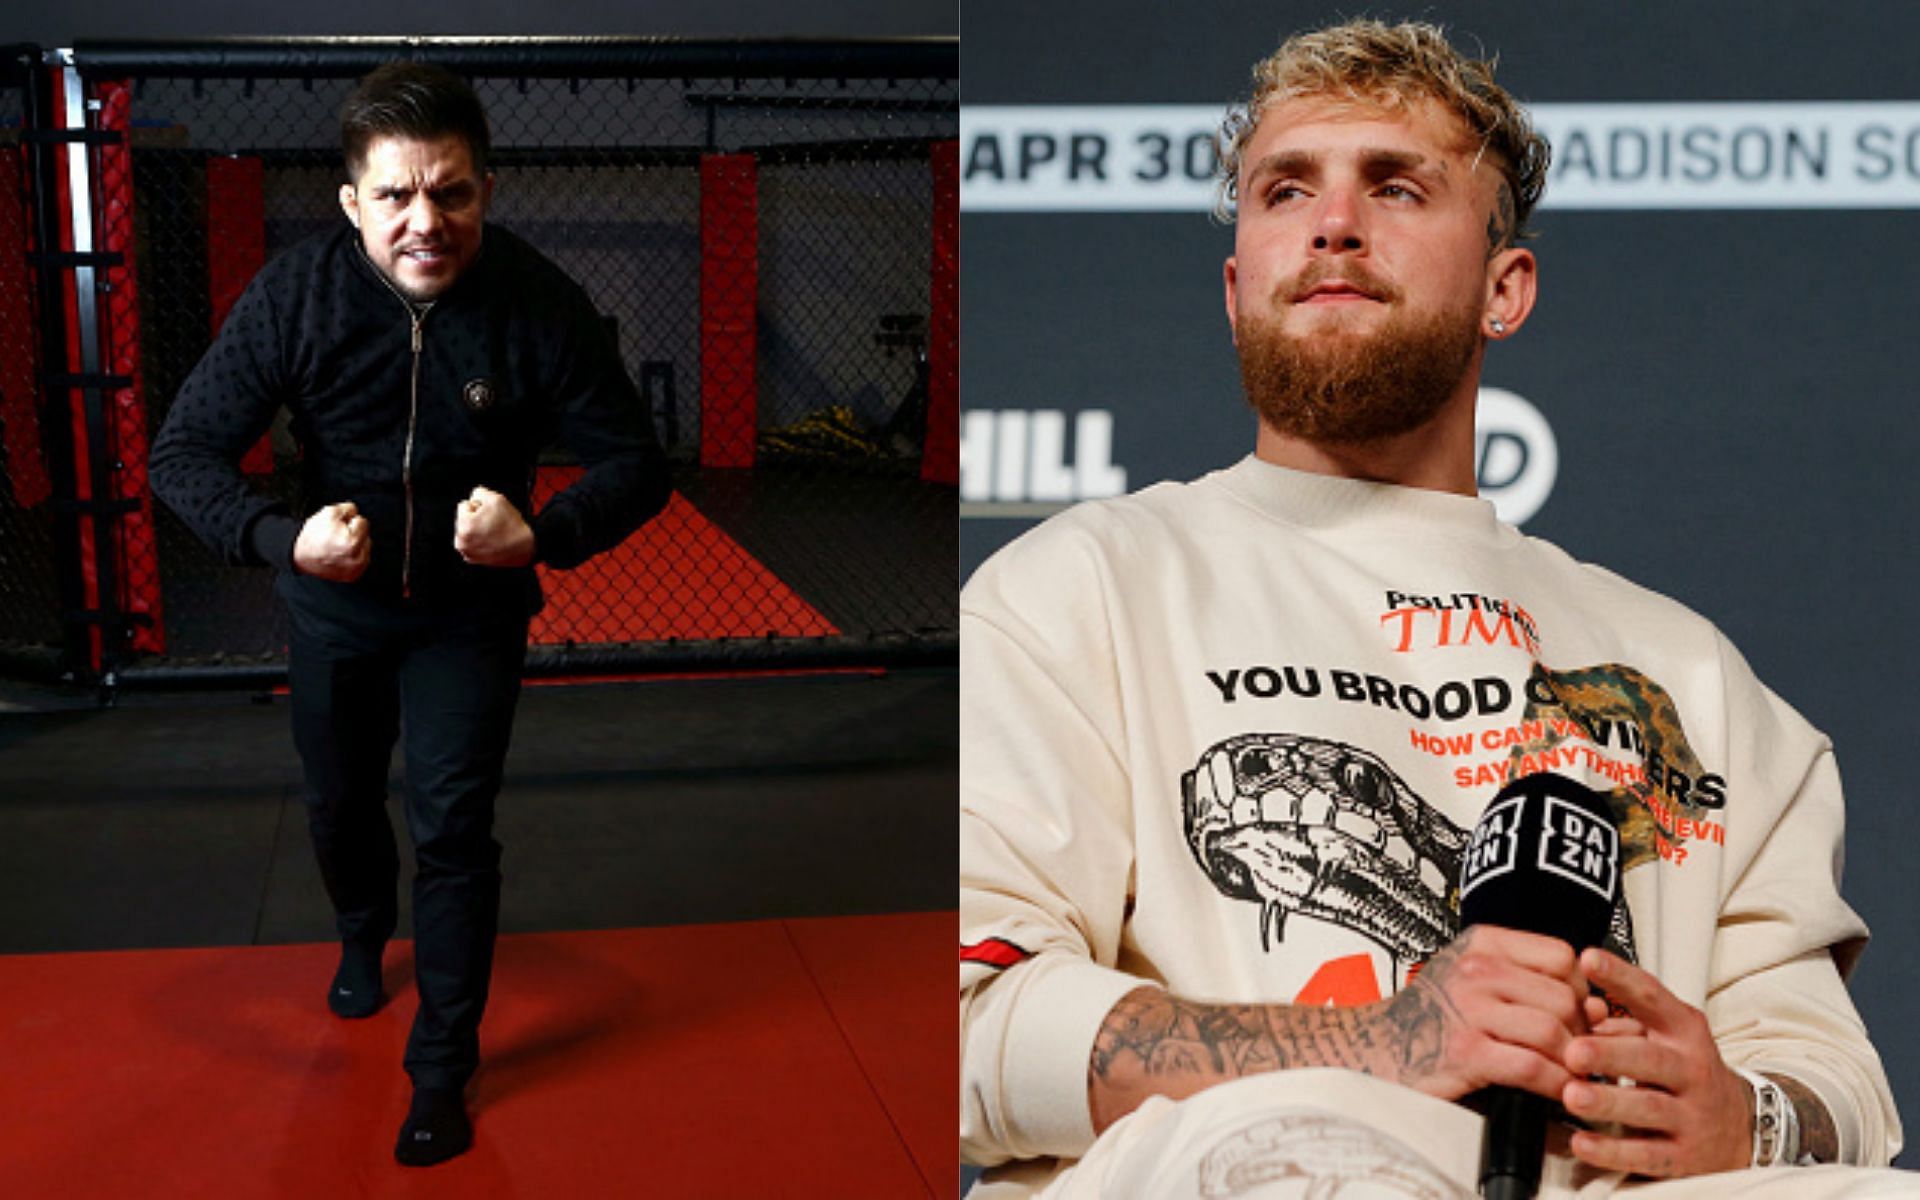 Henry Cejudo (left) and Jake Paul (right). (Images via Getty)